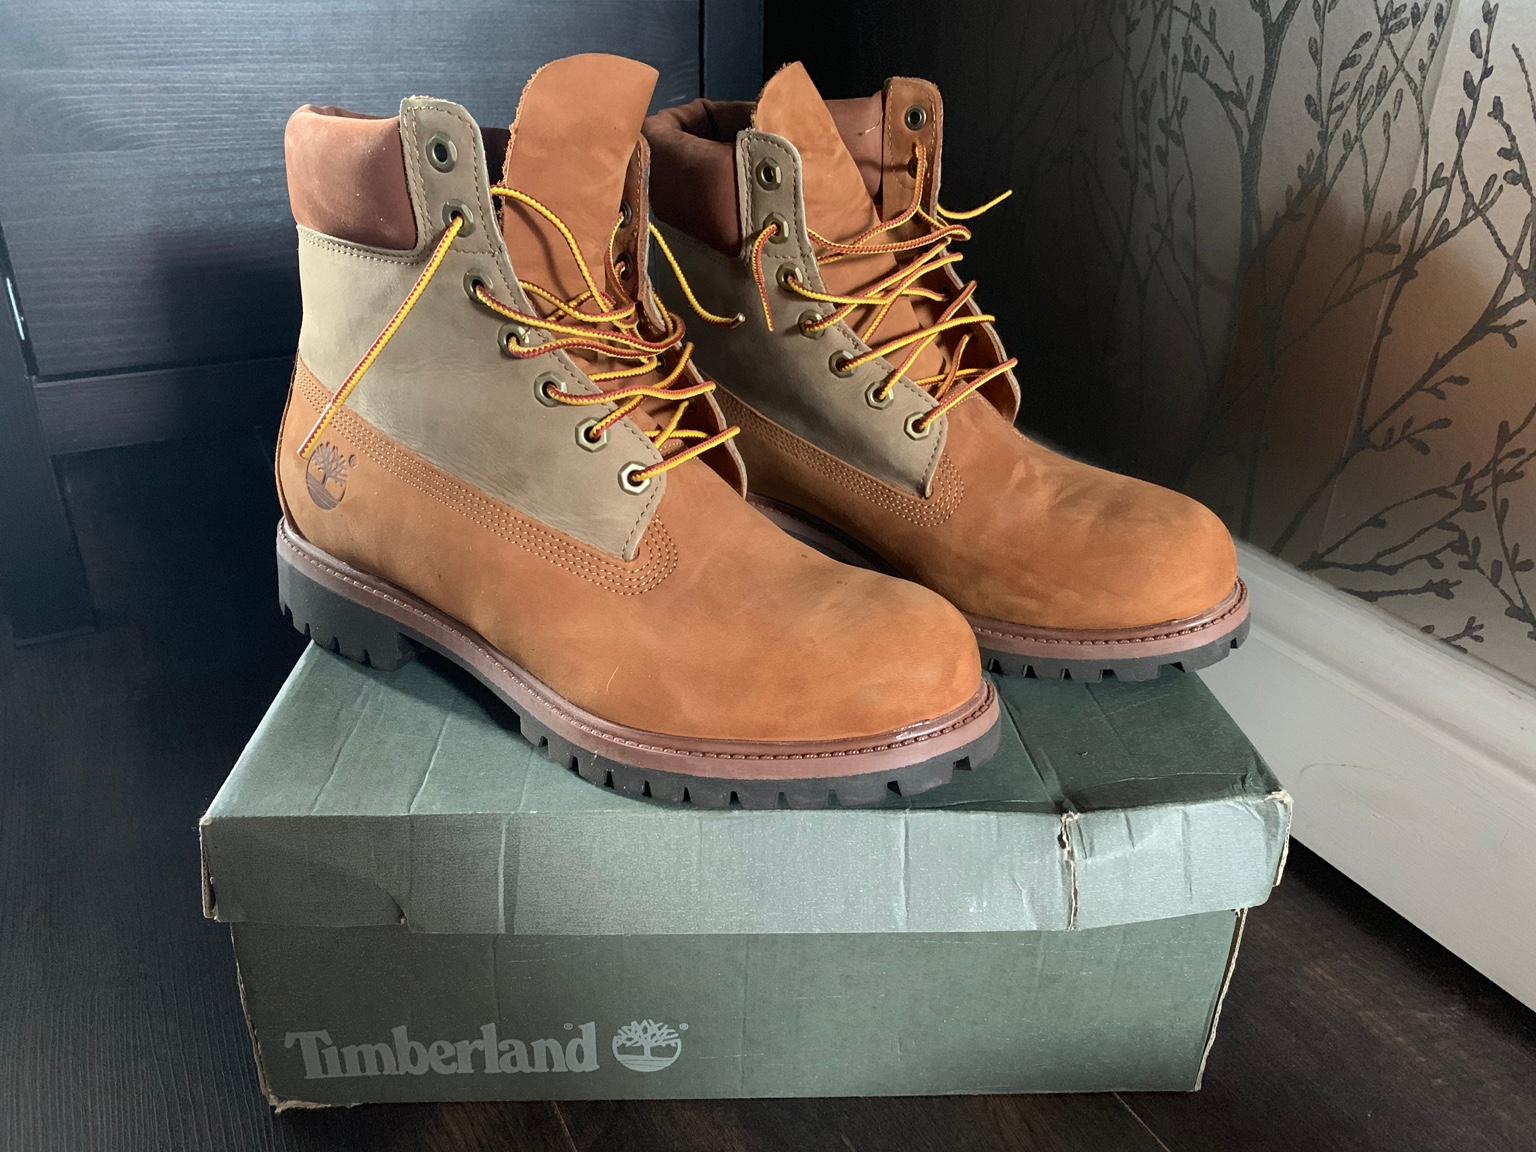 MENS TIMBERLAND BOOTS - SIZE 10 in S12 